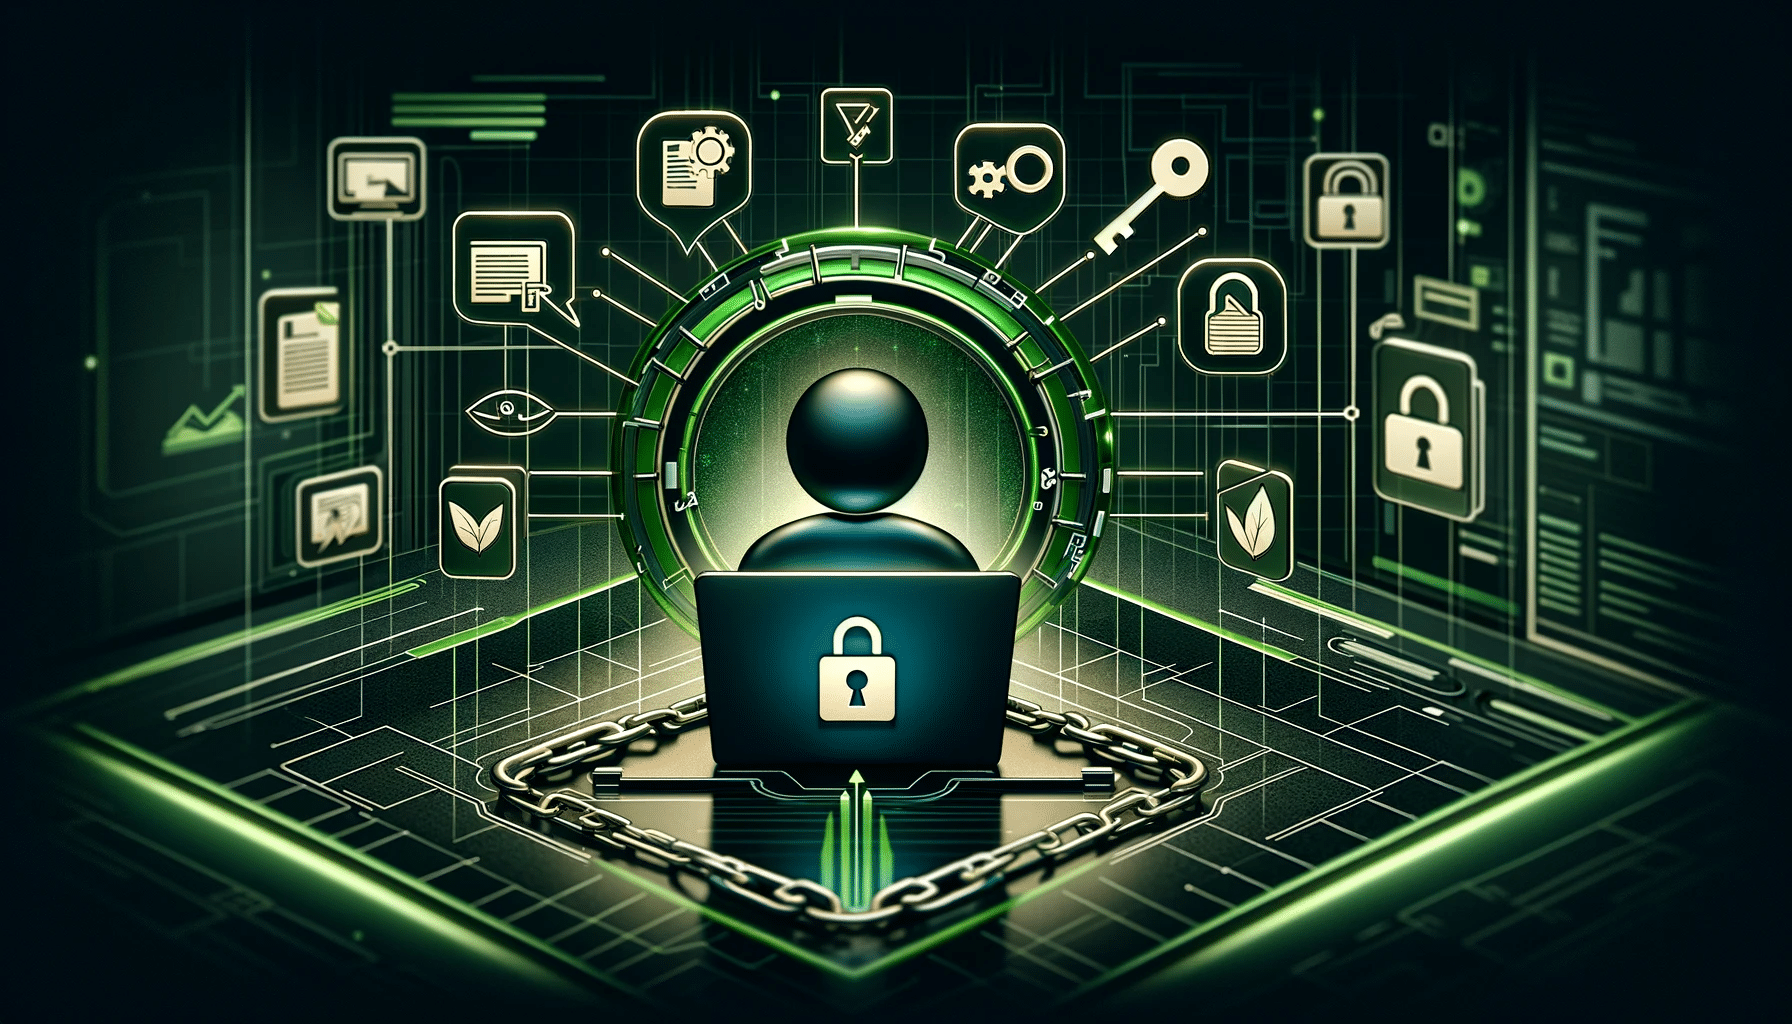 This image depicts a digital concept of cybersecurity, showing an icon of a person secured with a padlock and chain, surrounded by technology and security symbols.